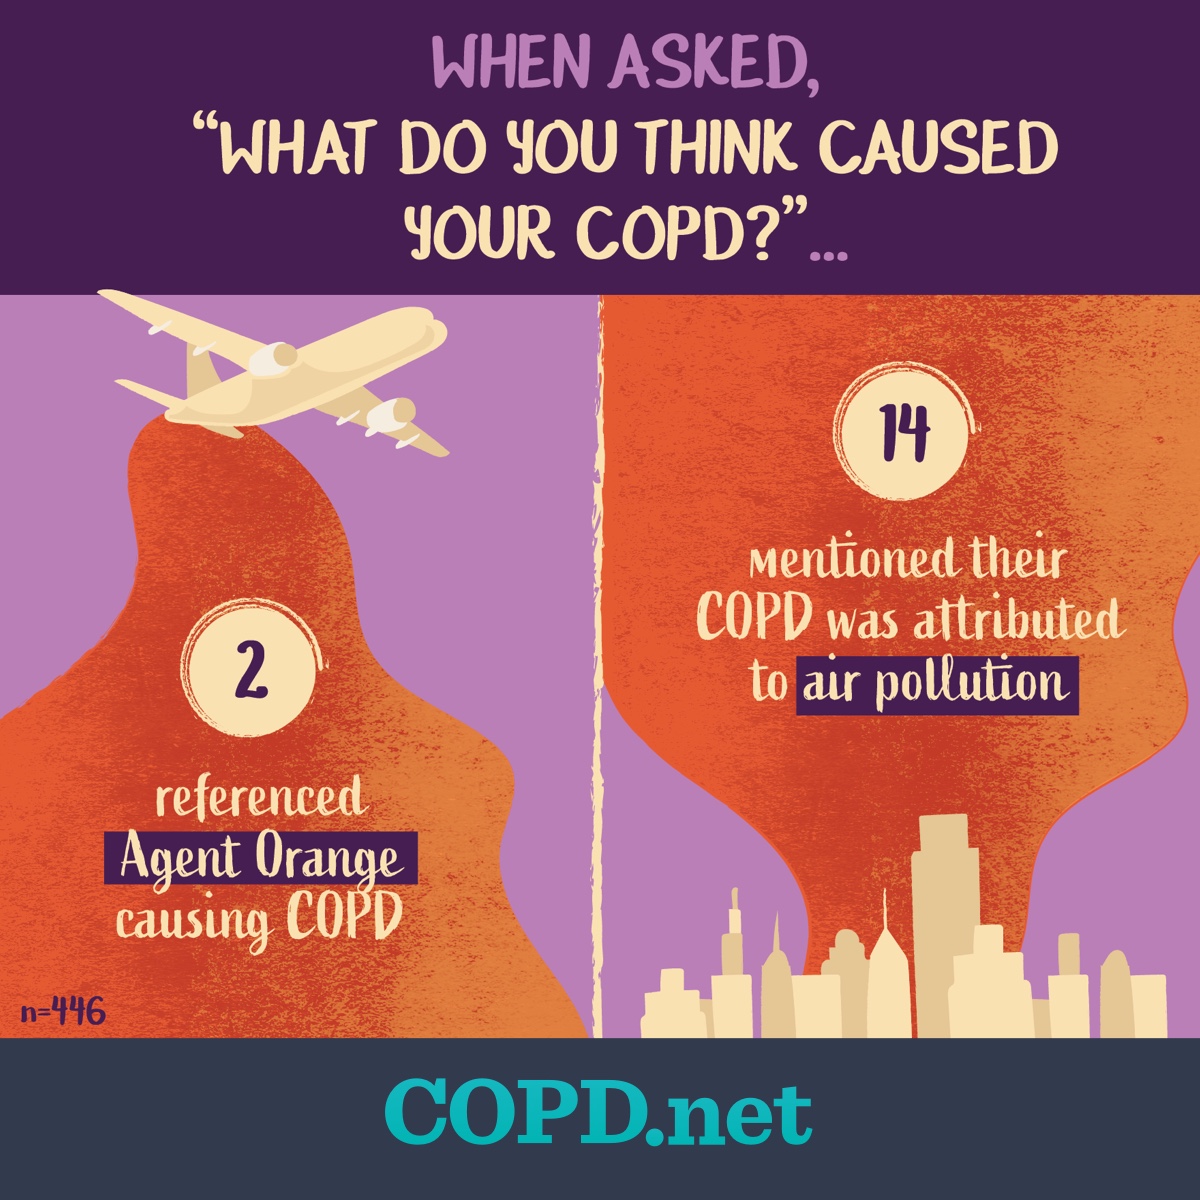 What Risk Factors or Causes Could Have Contributed to My COPD?